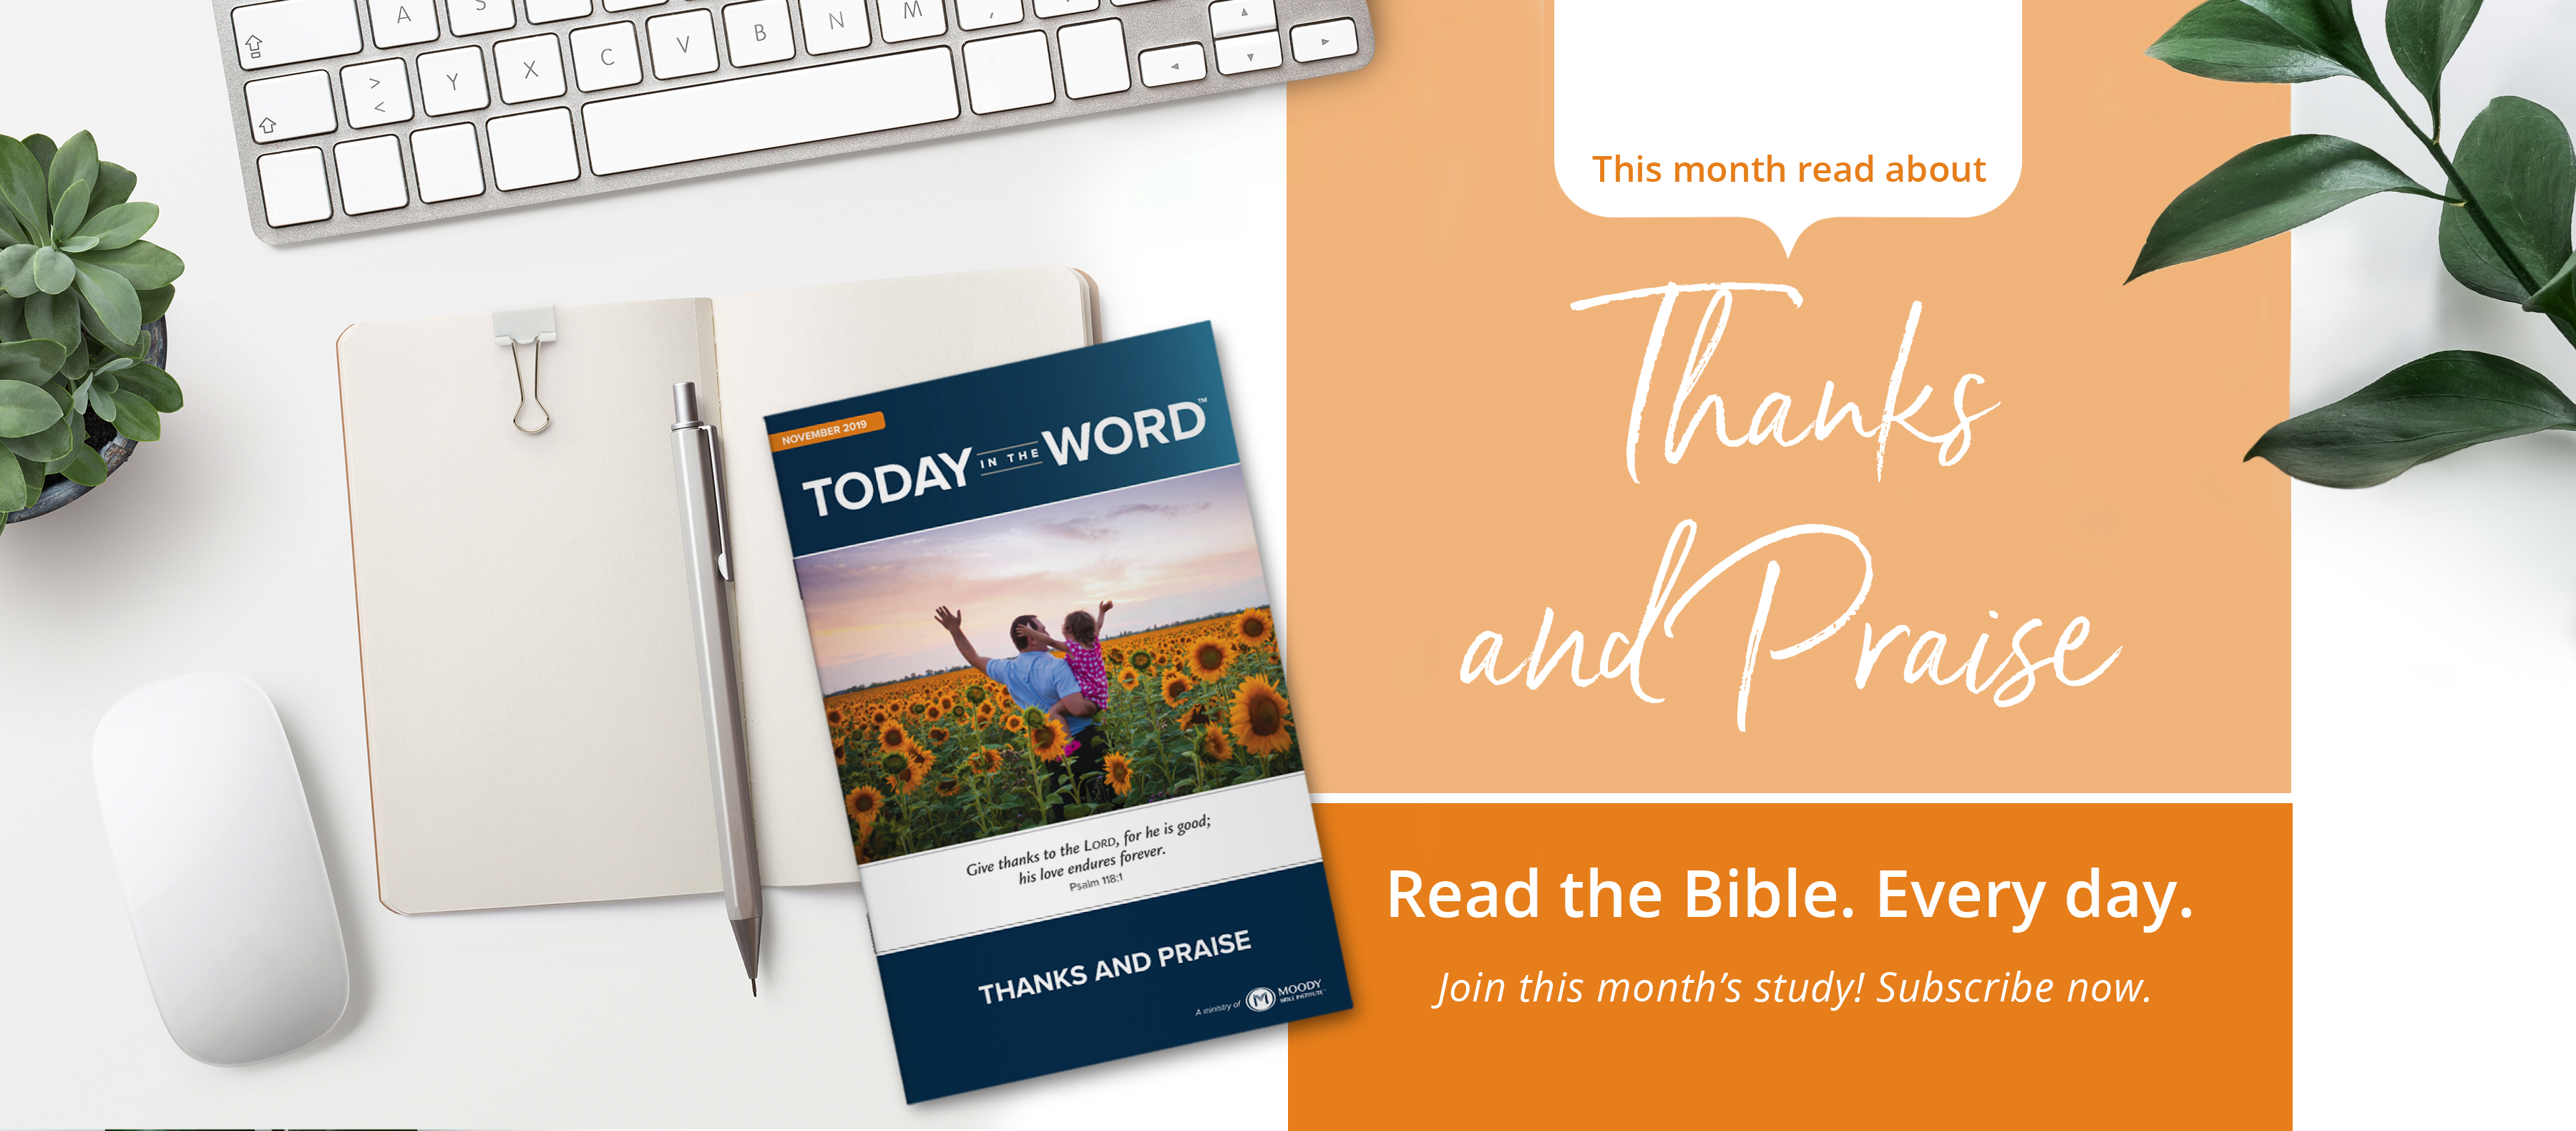 Daily Devotional | Praise God for His Word